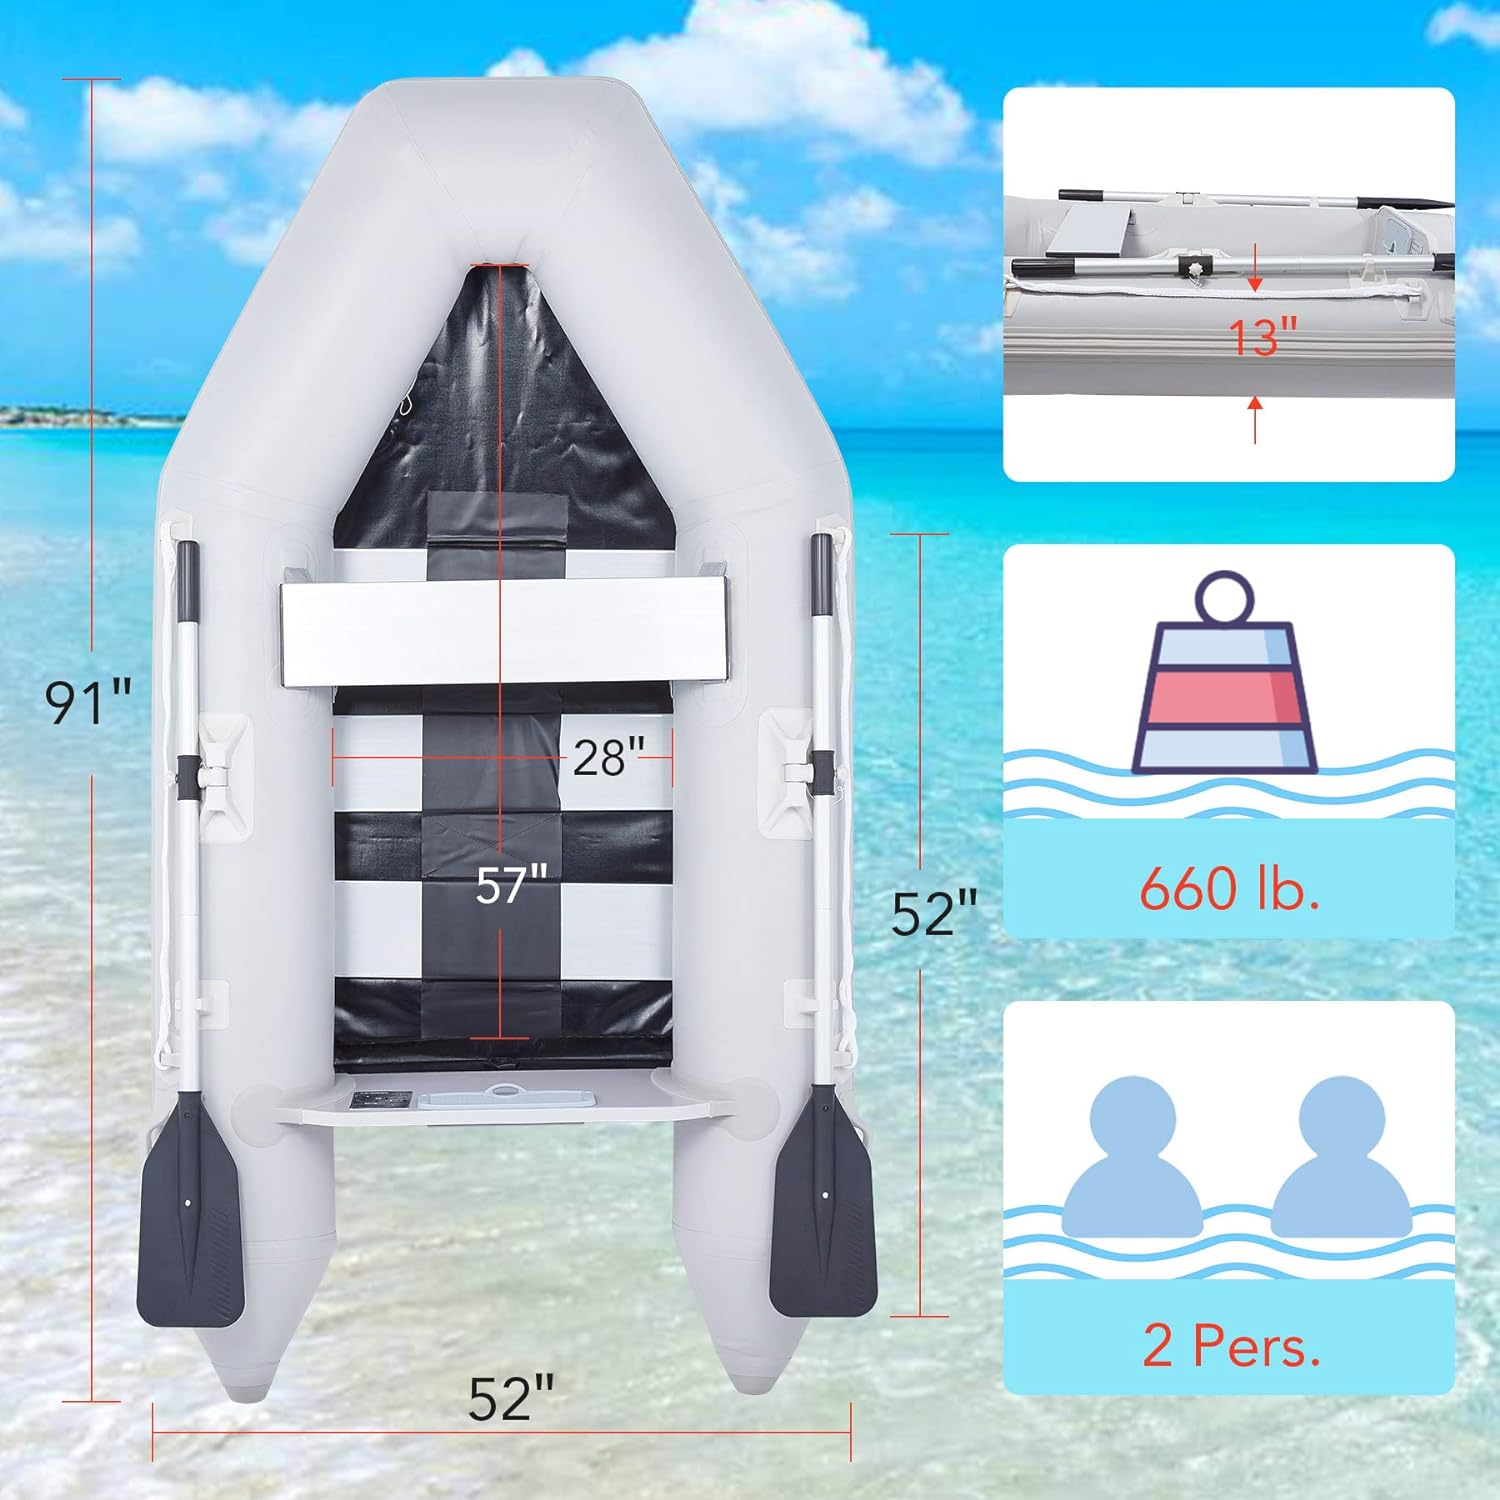 CO-Z 7.5 ft Inflatable Dinghy Boats with Aluminium Alloy Floor, 2 Person Portable Boat Raft, Inflatable Touring Kayak for Adults, Inflatable Sport Tender Fishing Dinghy Boat w/Panels Paddles Air Pump - CO-Z 7.5ft Inflatable Dinghy Boats Review